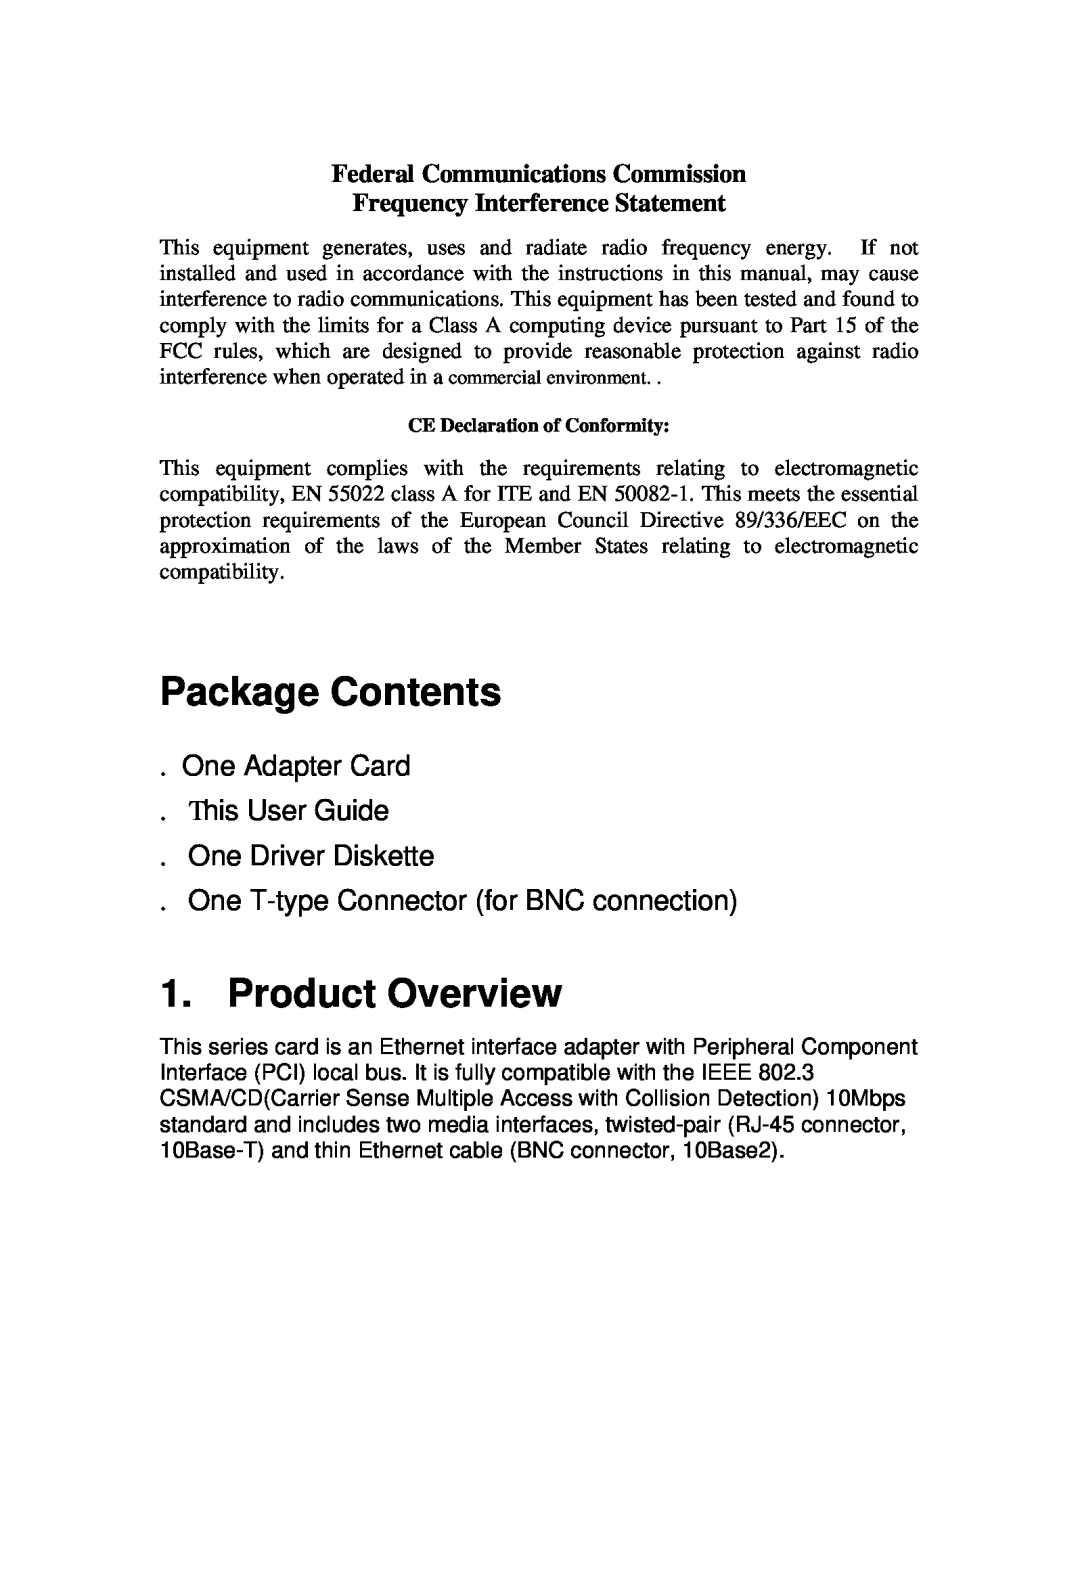 Acer ALN-201 manual Package Contents, Product Overview, Federal Communications Commission Frequency Interference Statement 